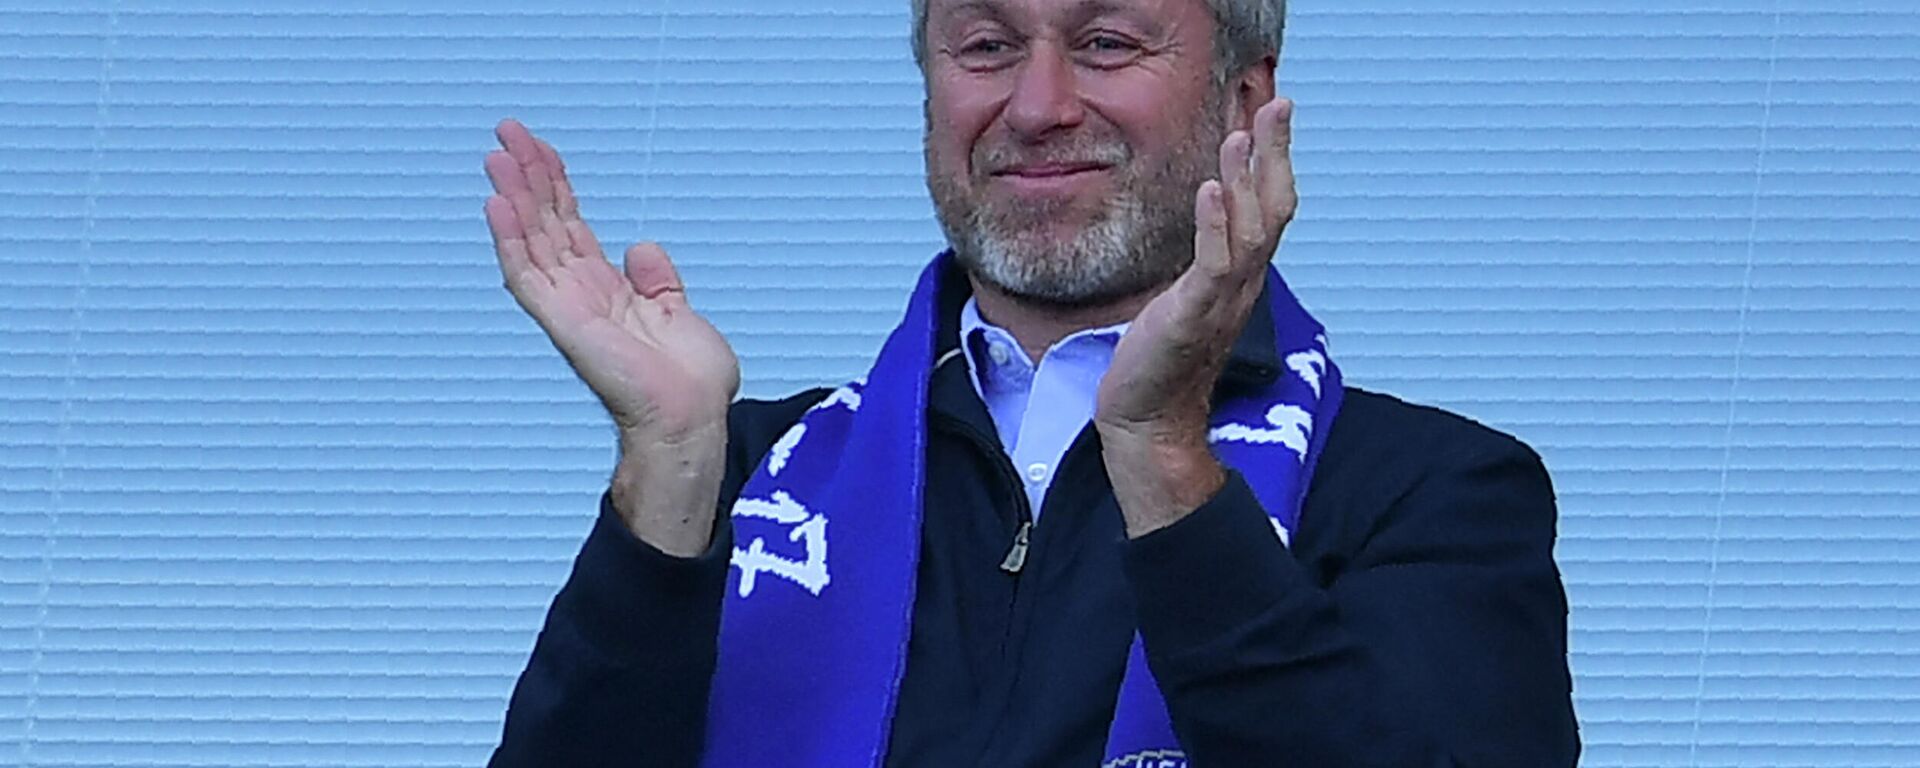 Chelsea's Russian owner Roman Abramovich applauds, as players celebrate their league title win at the end of the Premier League football match between Chelsea and Sunderland at Stamford Bridge in London. - Sputnik International, 1920, 02.03.2022